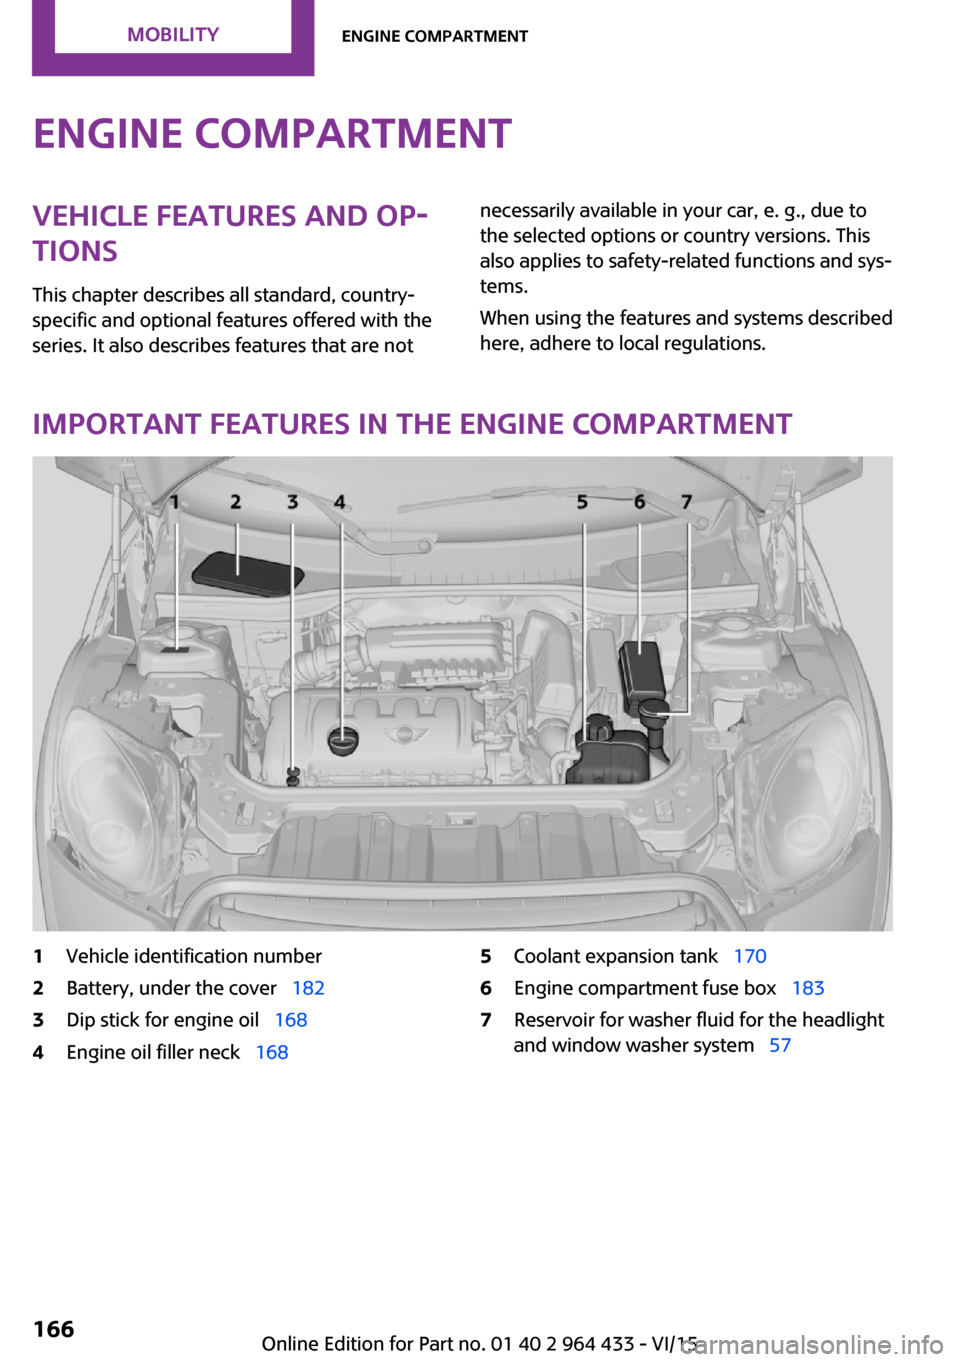 MINI Paceman 2016  Owners Manual (Mini Connected) Engine compartmentVehicle features and op‐
tions
This chapter describes all standard, country-
specific and optional features offered with the series. It also describes features that are notnecessar